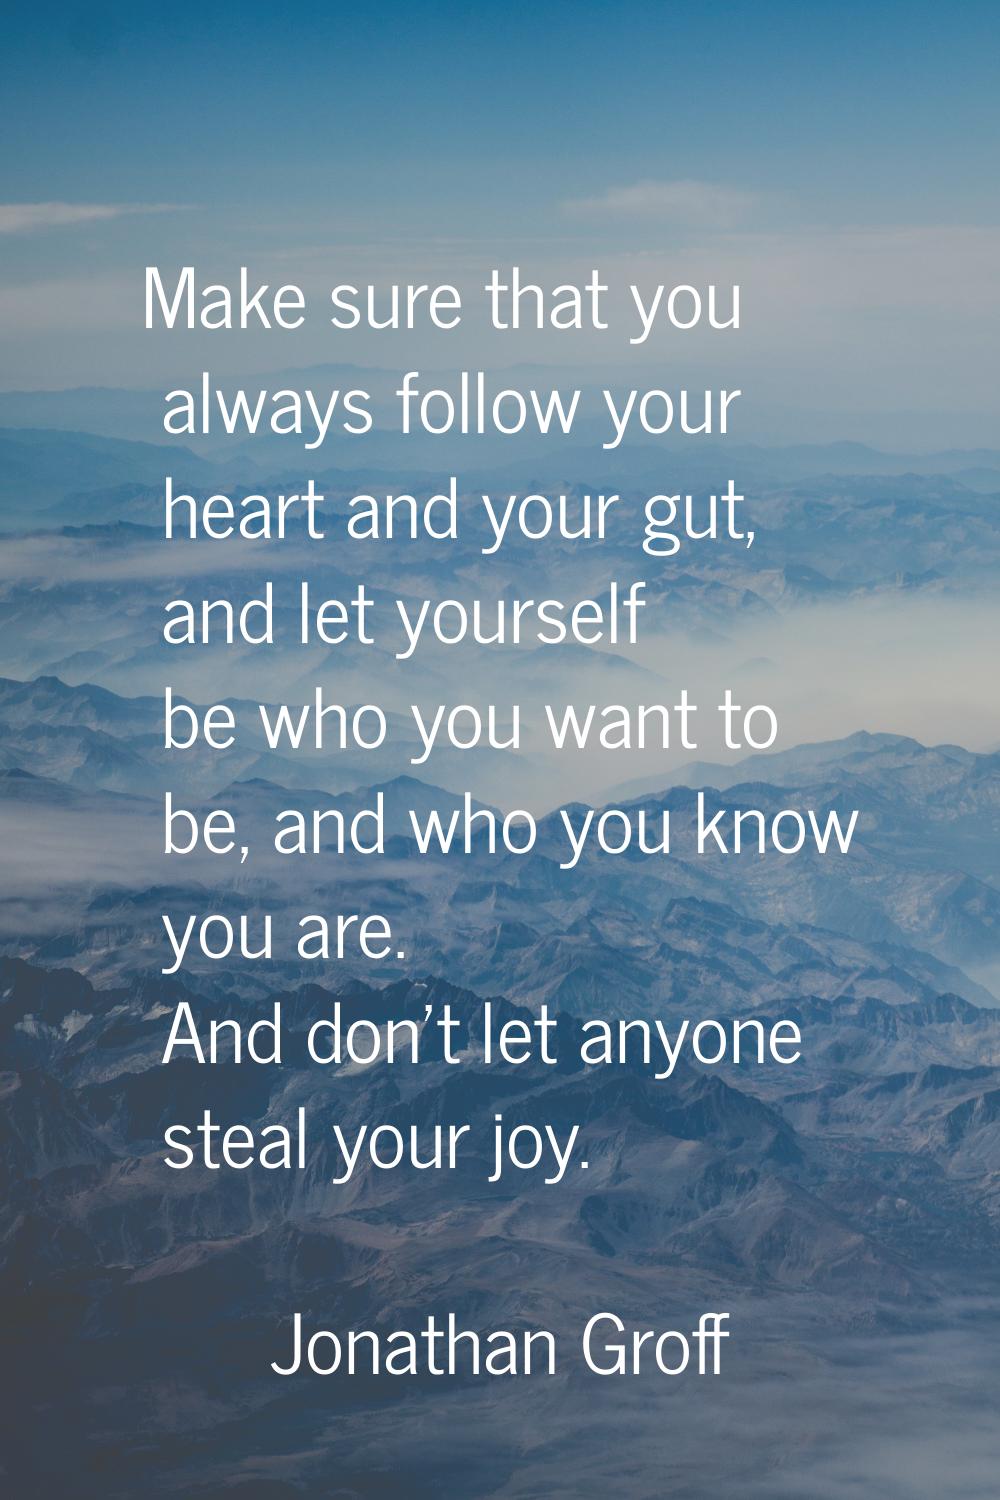 Make sure that you always follow your heart and your gut, and let yourself be who you want to be, a